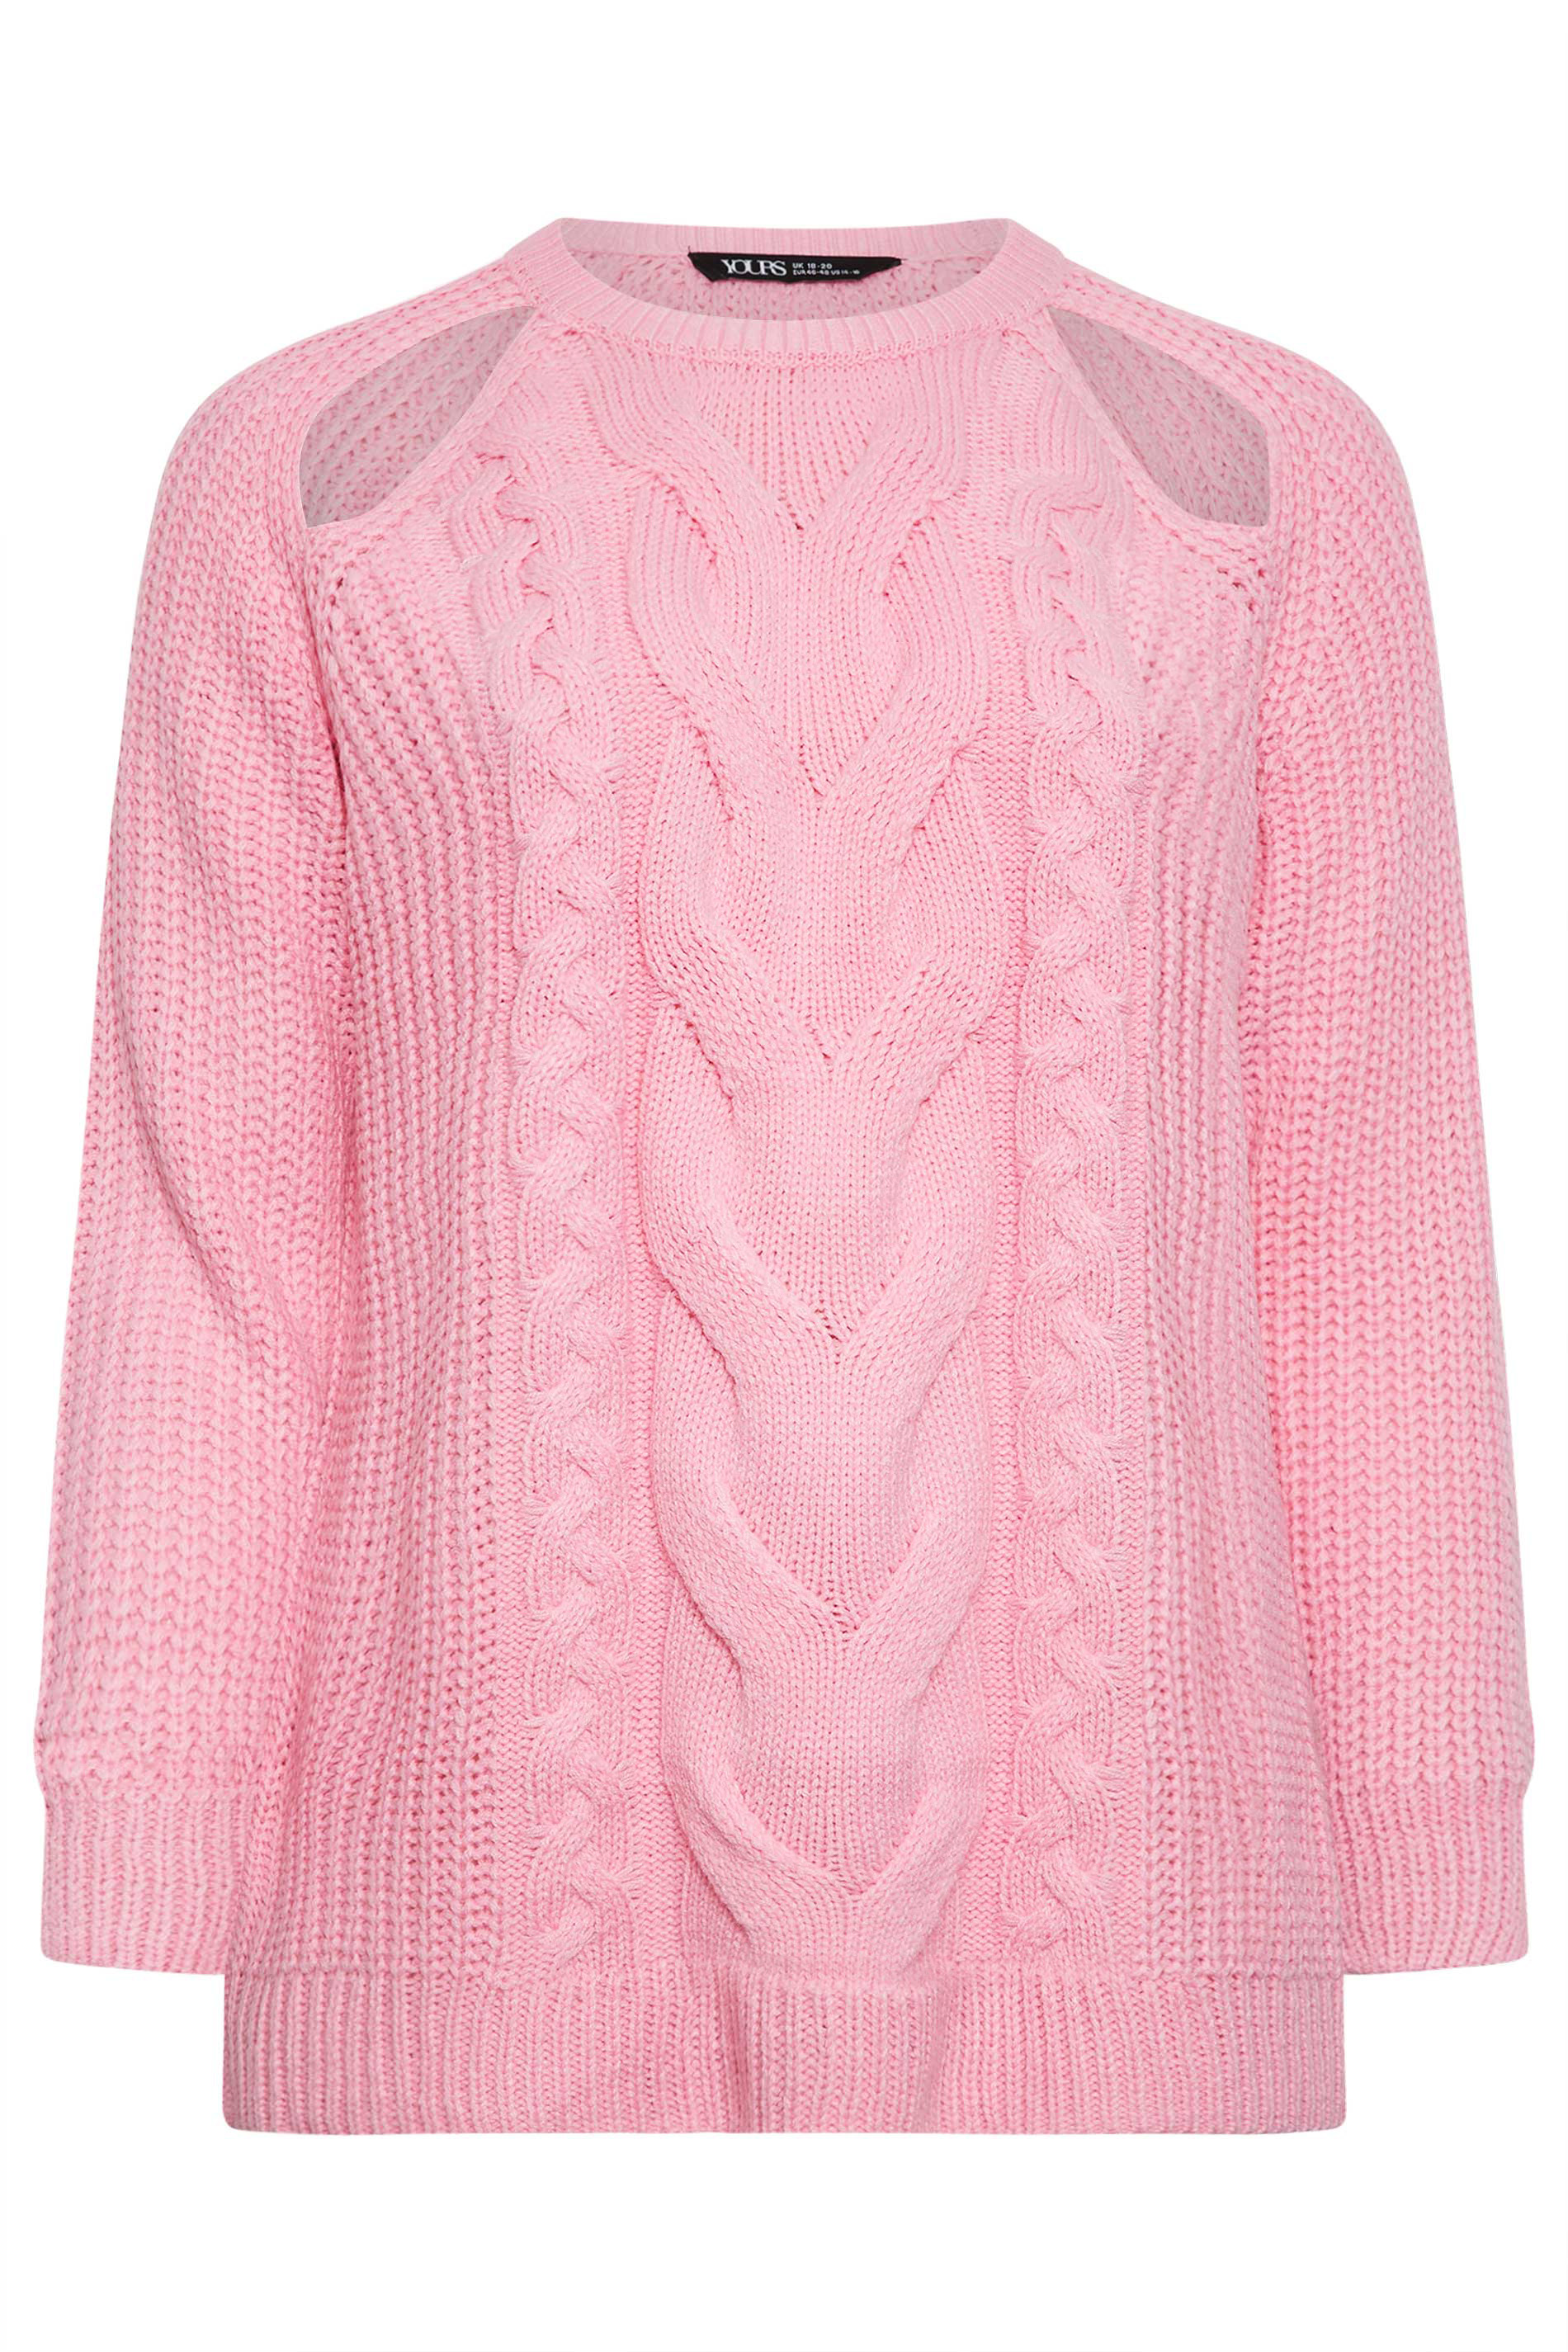 YOURS Plus Size Pink Cable Knit Cut Out Jumper | Yours Clothing